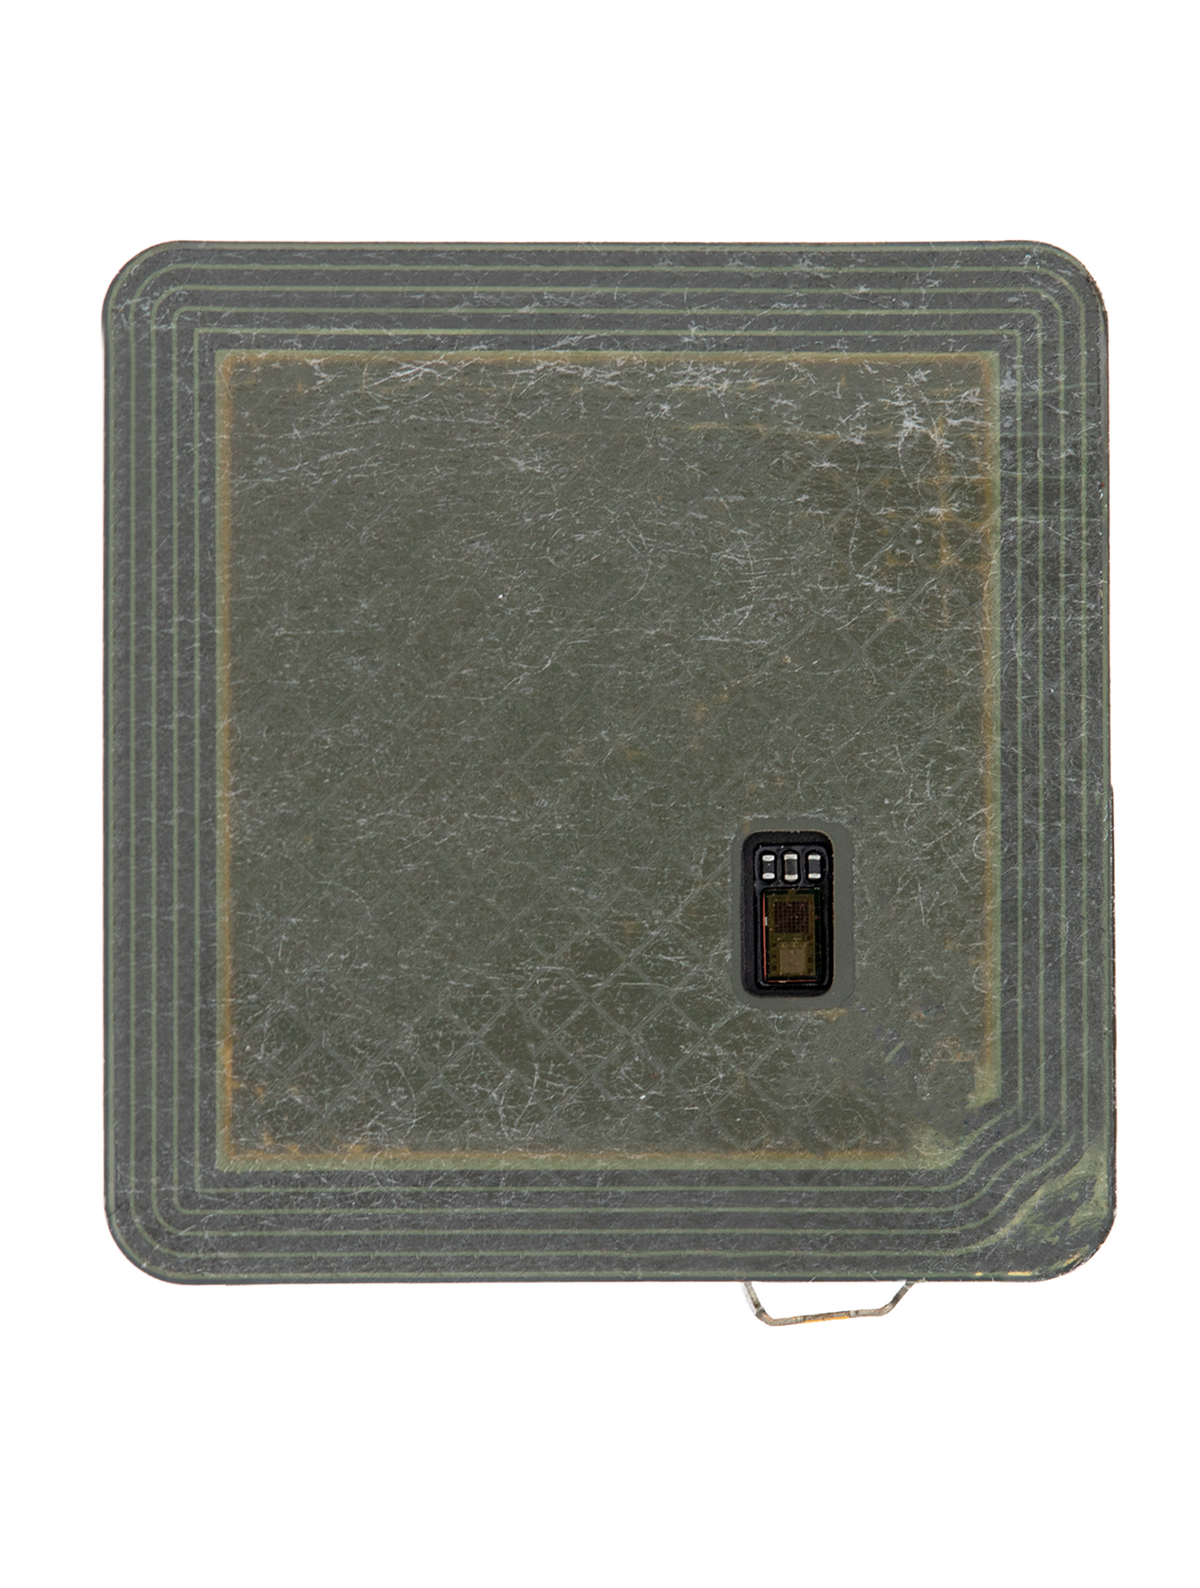 NFC WIRELESS ANTENNA PAD (GPS VERSION) COMPATIBLE WITH WATCH SERIES 3 (42MM)